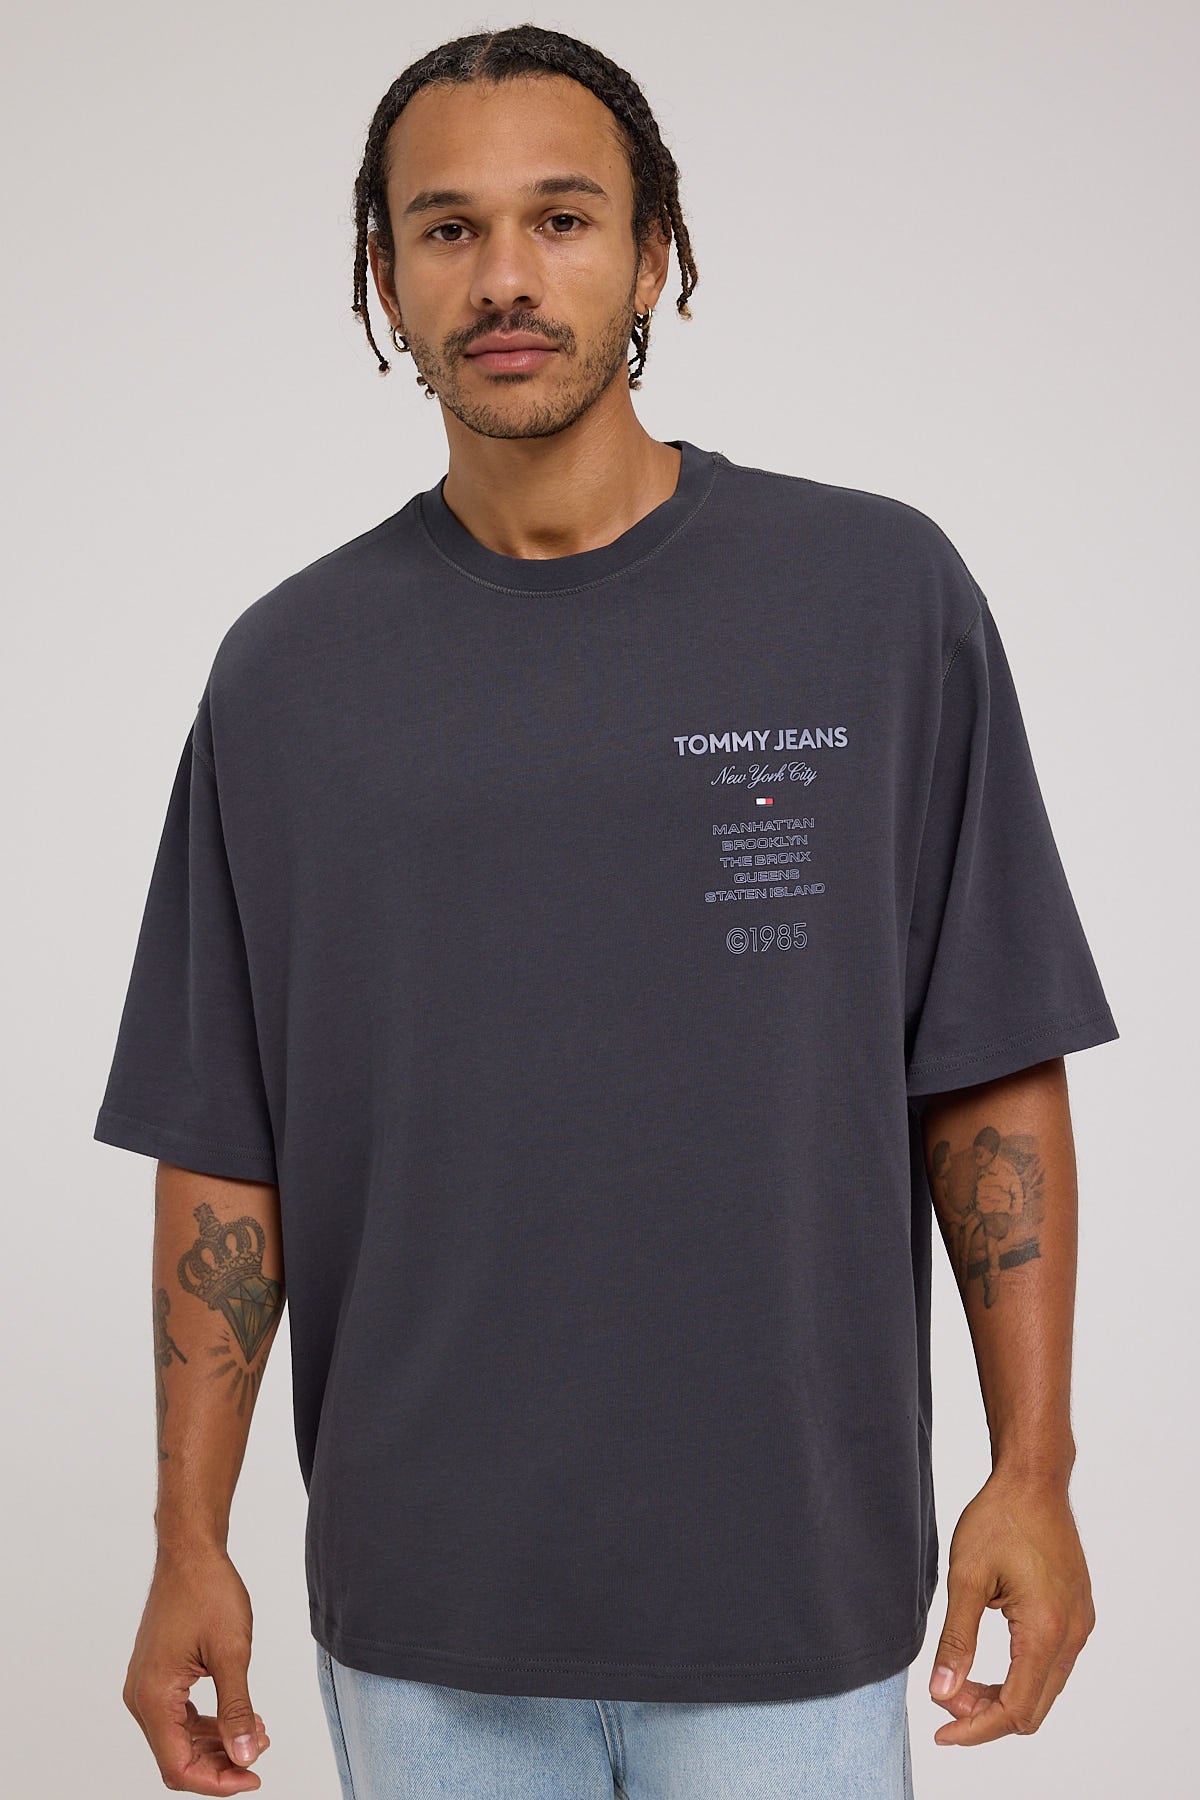 Tommy Jeans Oversized TJ NYC 1985 Cities Tee New Charcoal